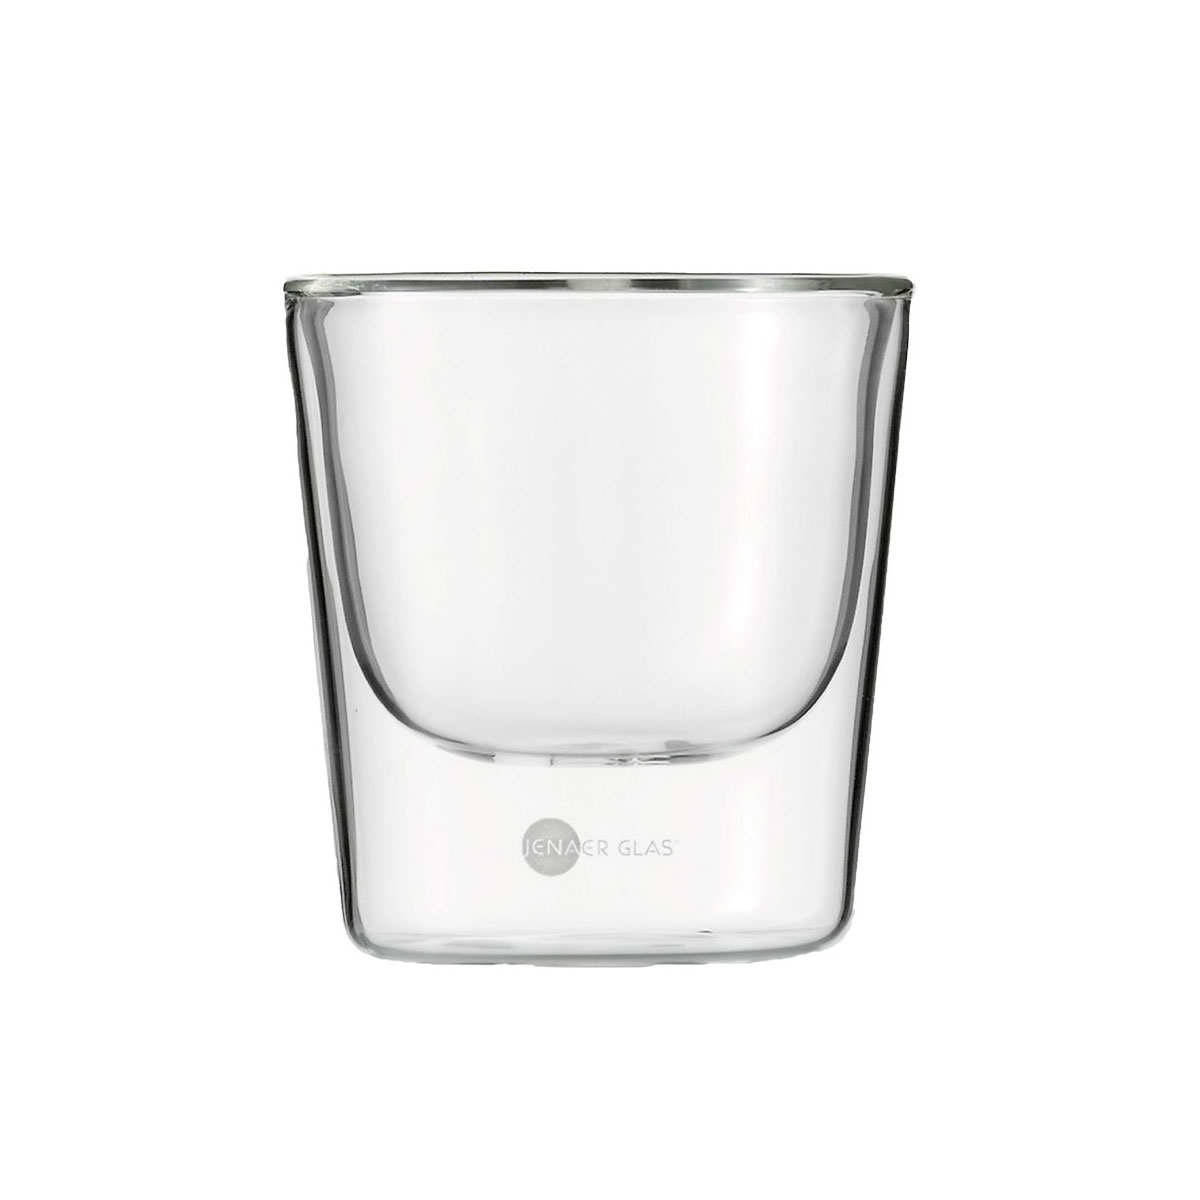 Jenaer Glas Hot and Cool Double Wall Tumbler, Small